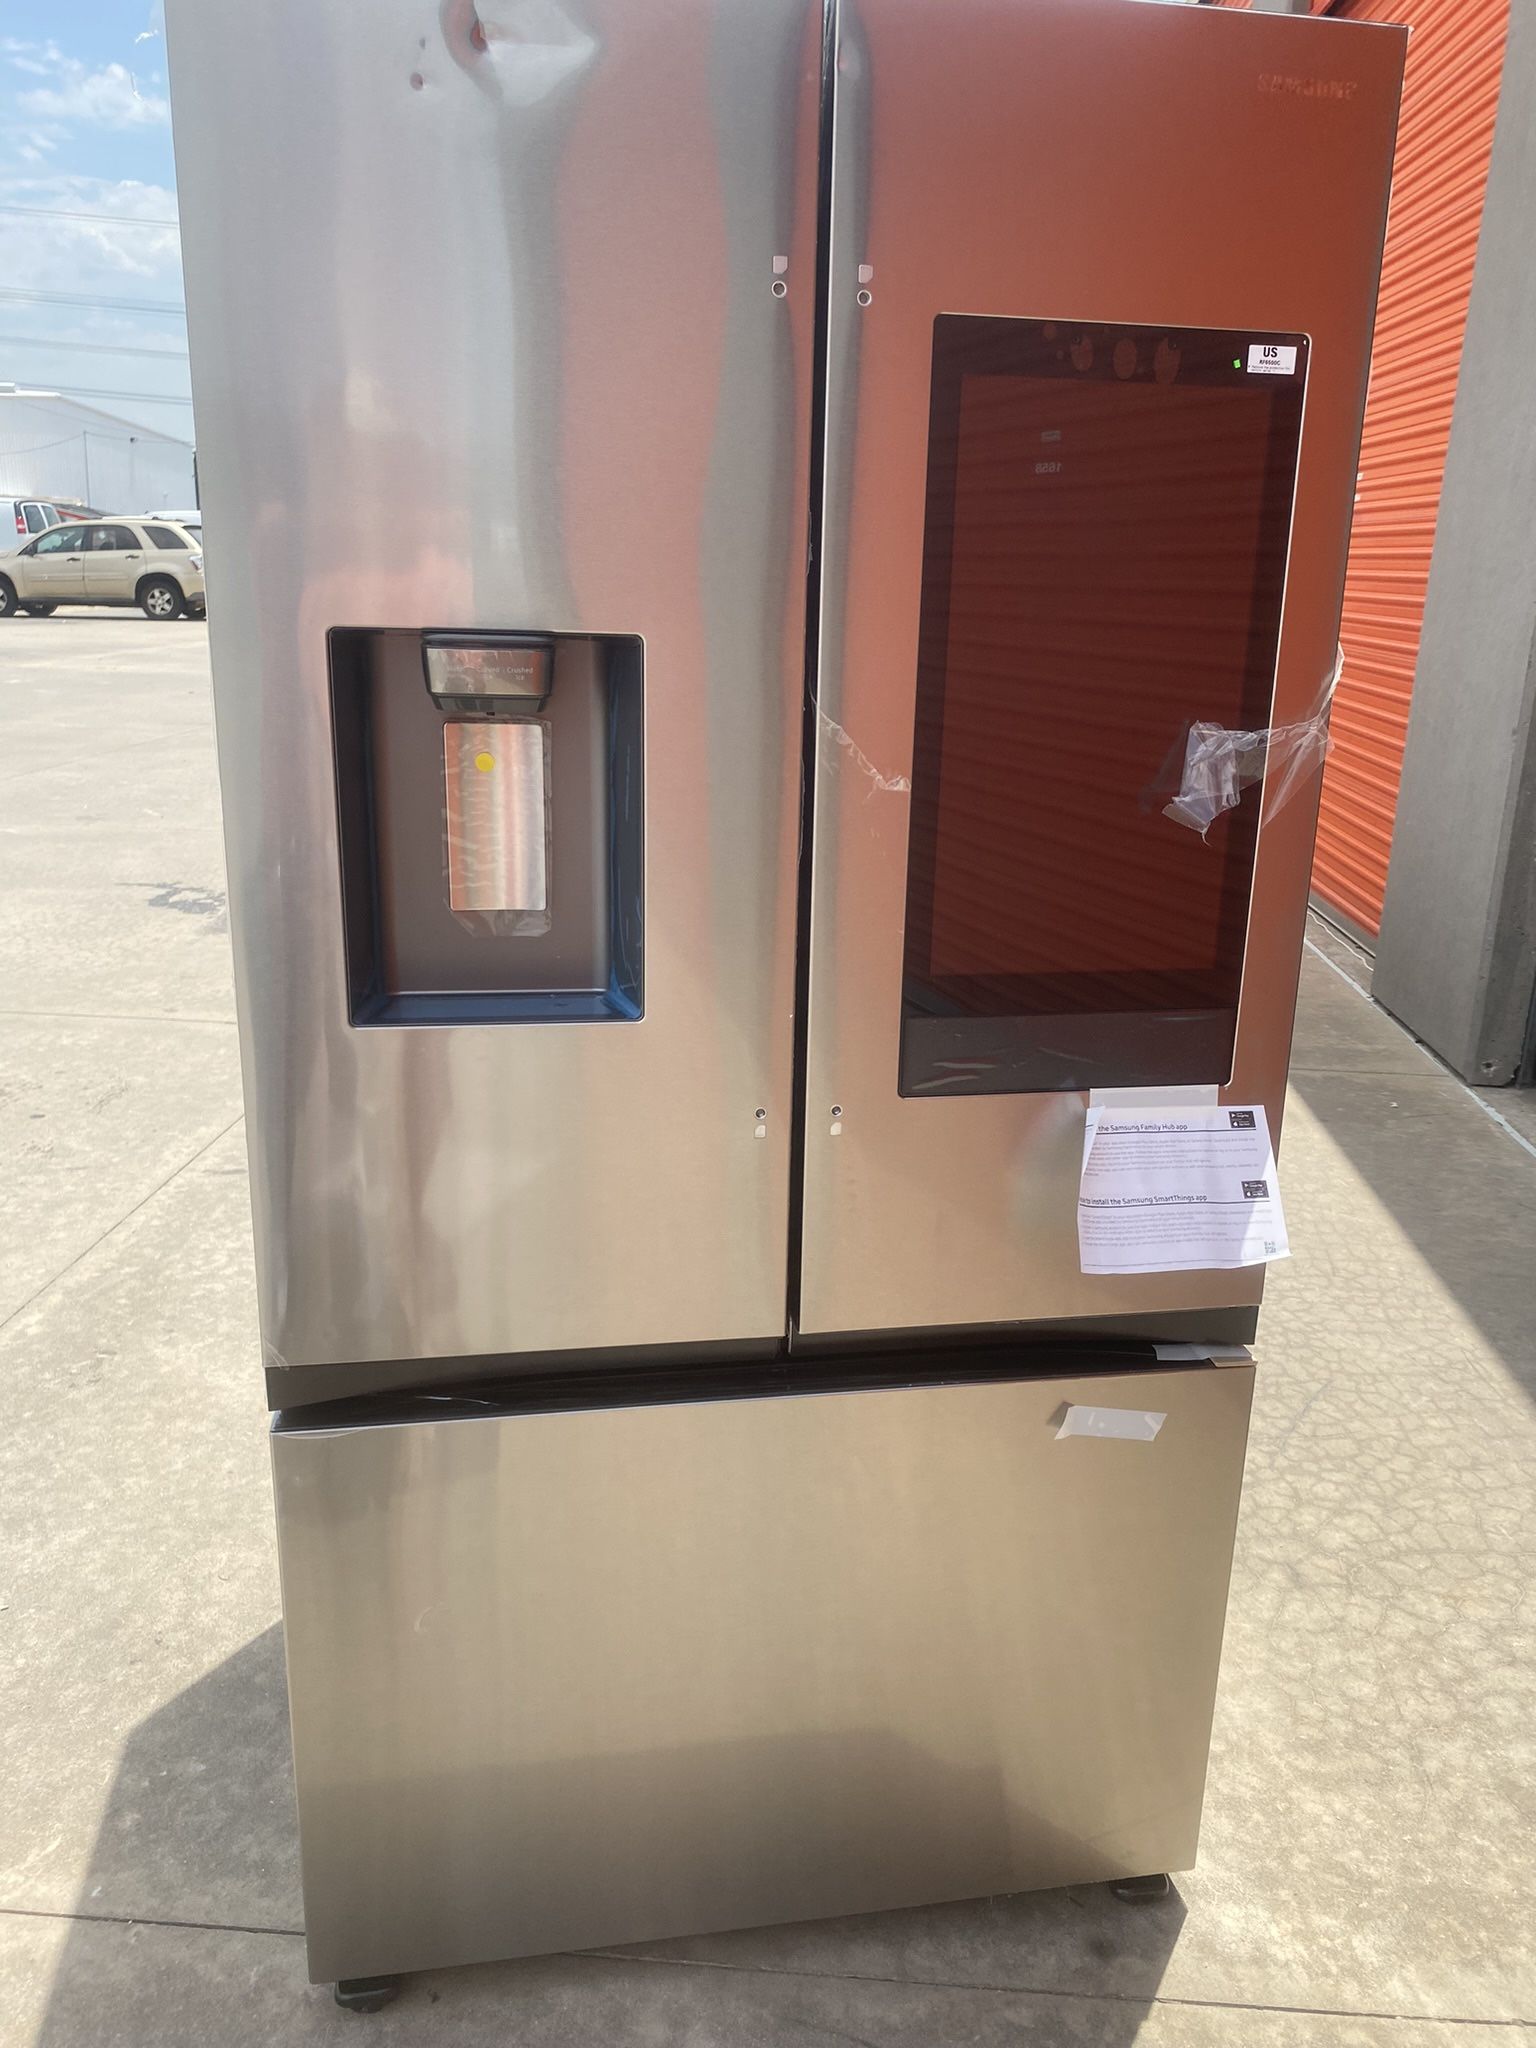 New Small Dent Samsung Counter-depth Mega Capacity 25-cu ft Smart French Door with Dual Ice Maker, Water and Ice Dispenser $1850.00 O.B.O